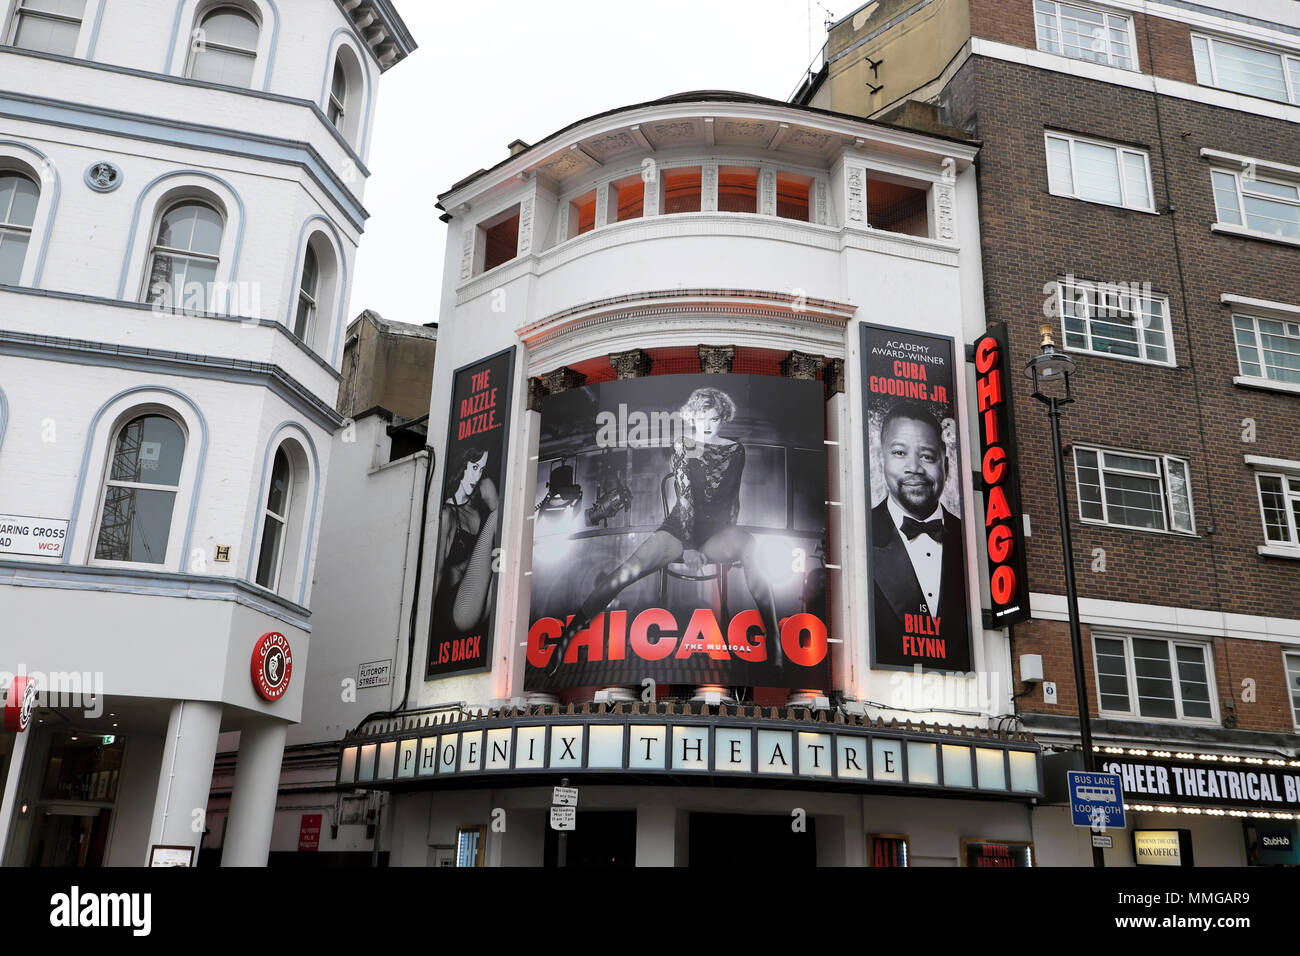 Exterior view of Phoenix Theatre with advertisement for Chicago musical actor Cuba Gooding Jr on Charing Cross Road in London England UK  KATHY DEWITT Stock Photo